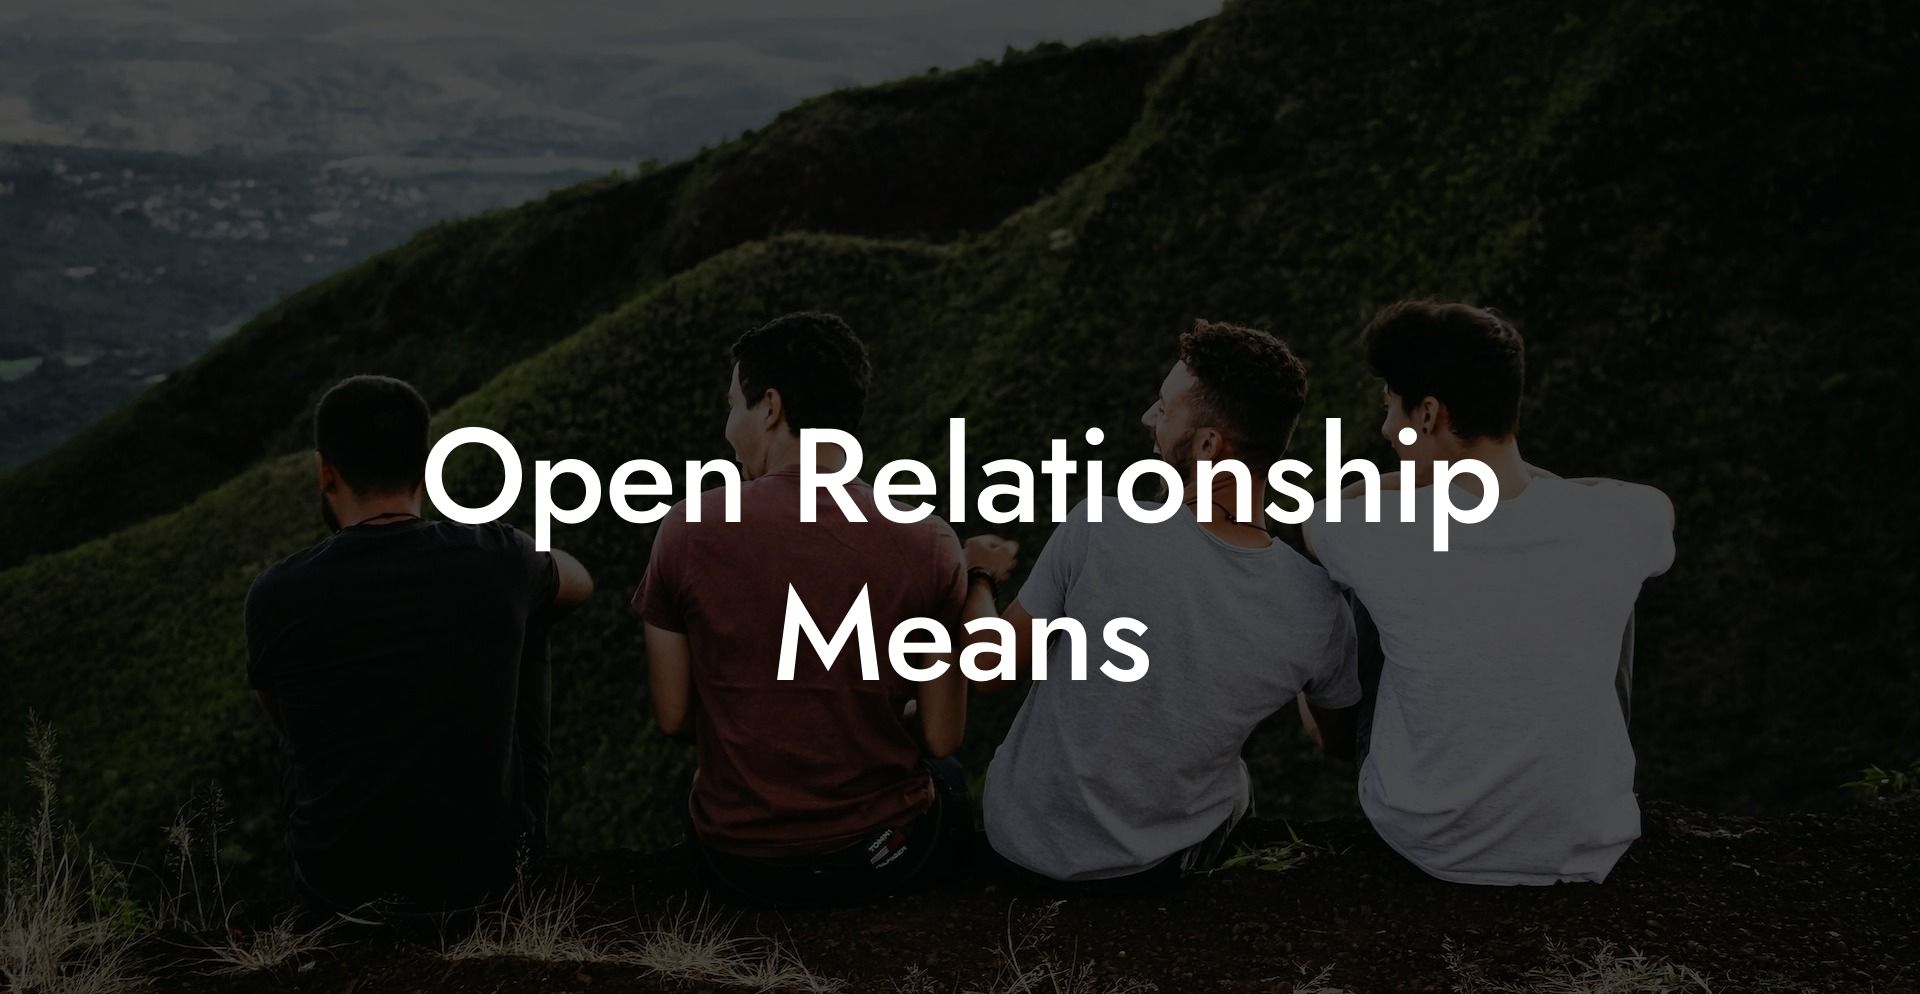 Open Relationship Means